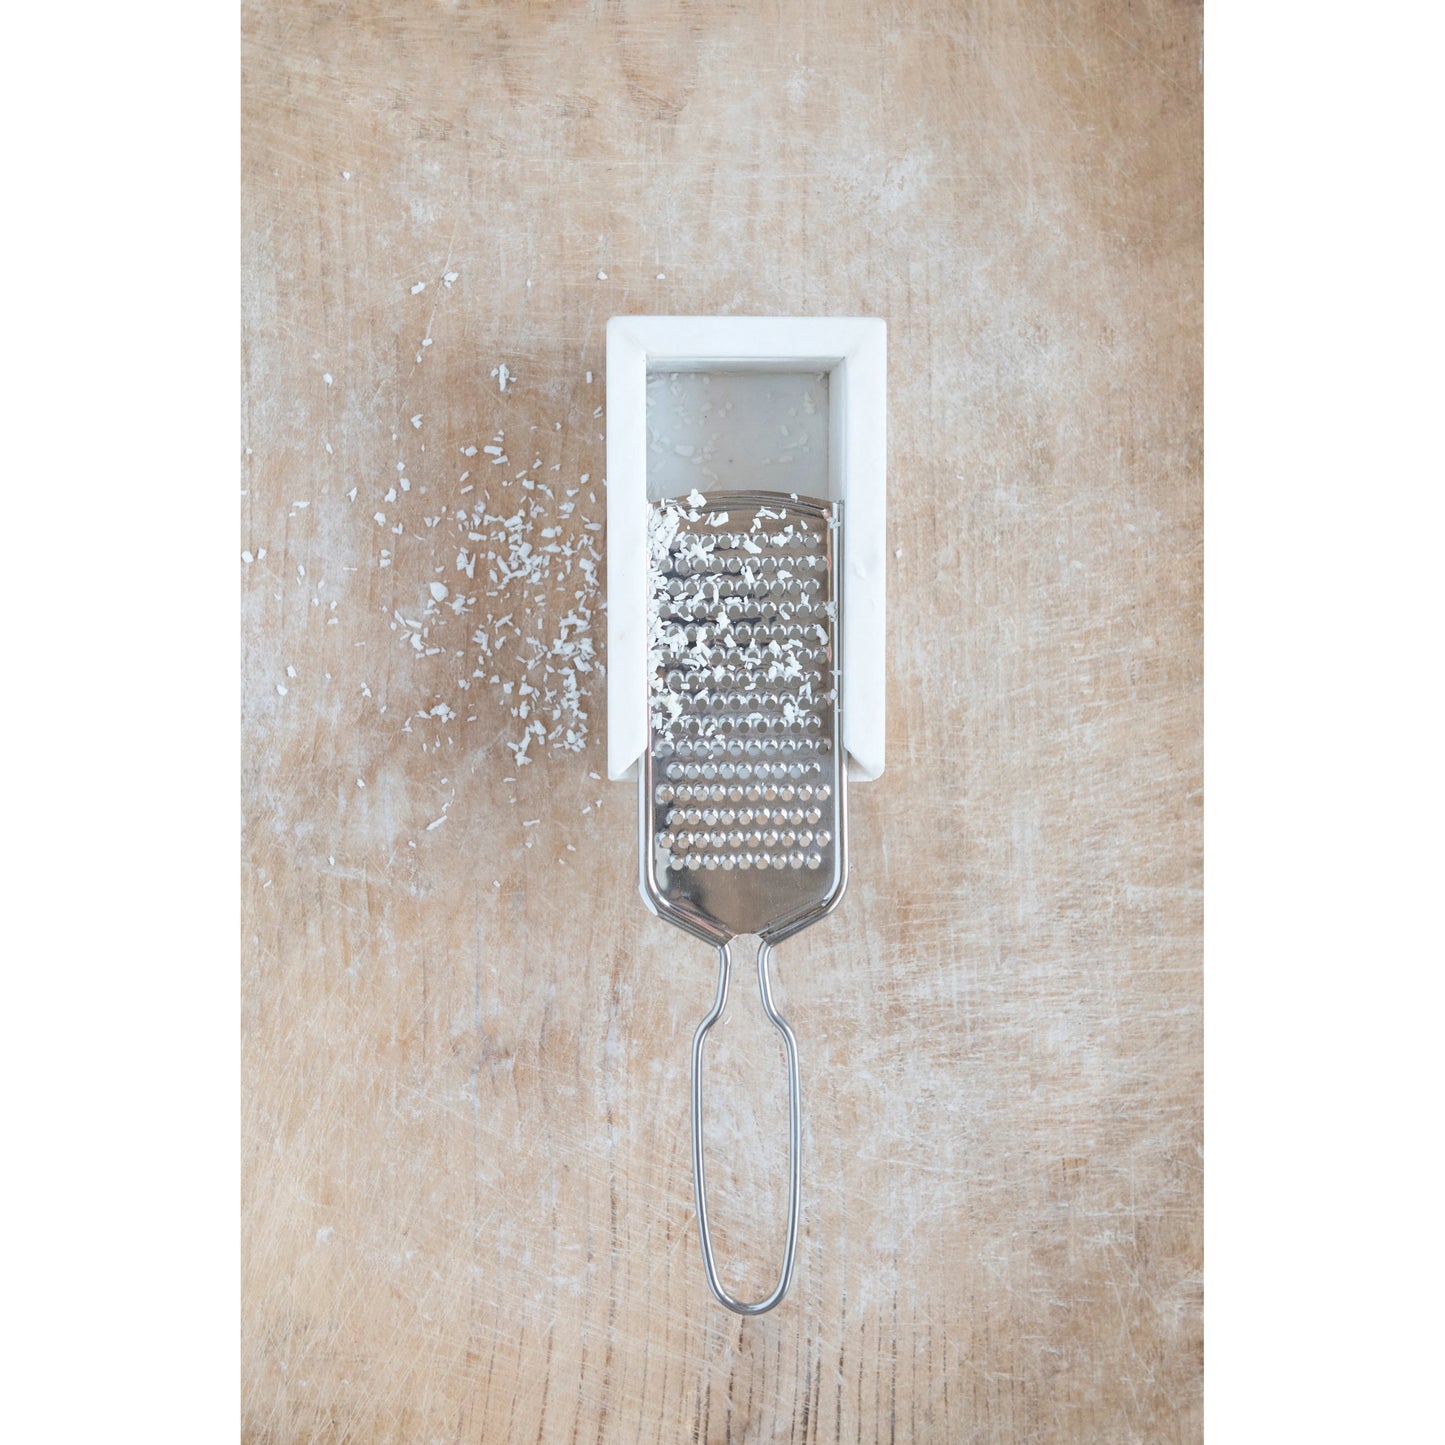 Marble and Stainless Steel Grater